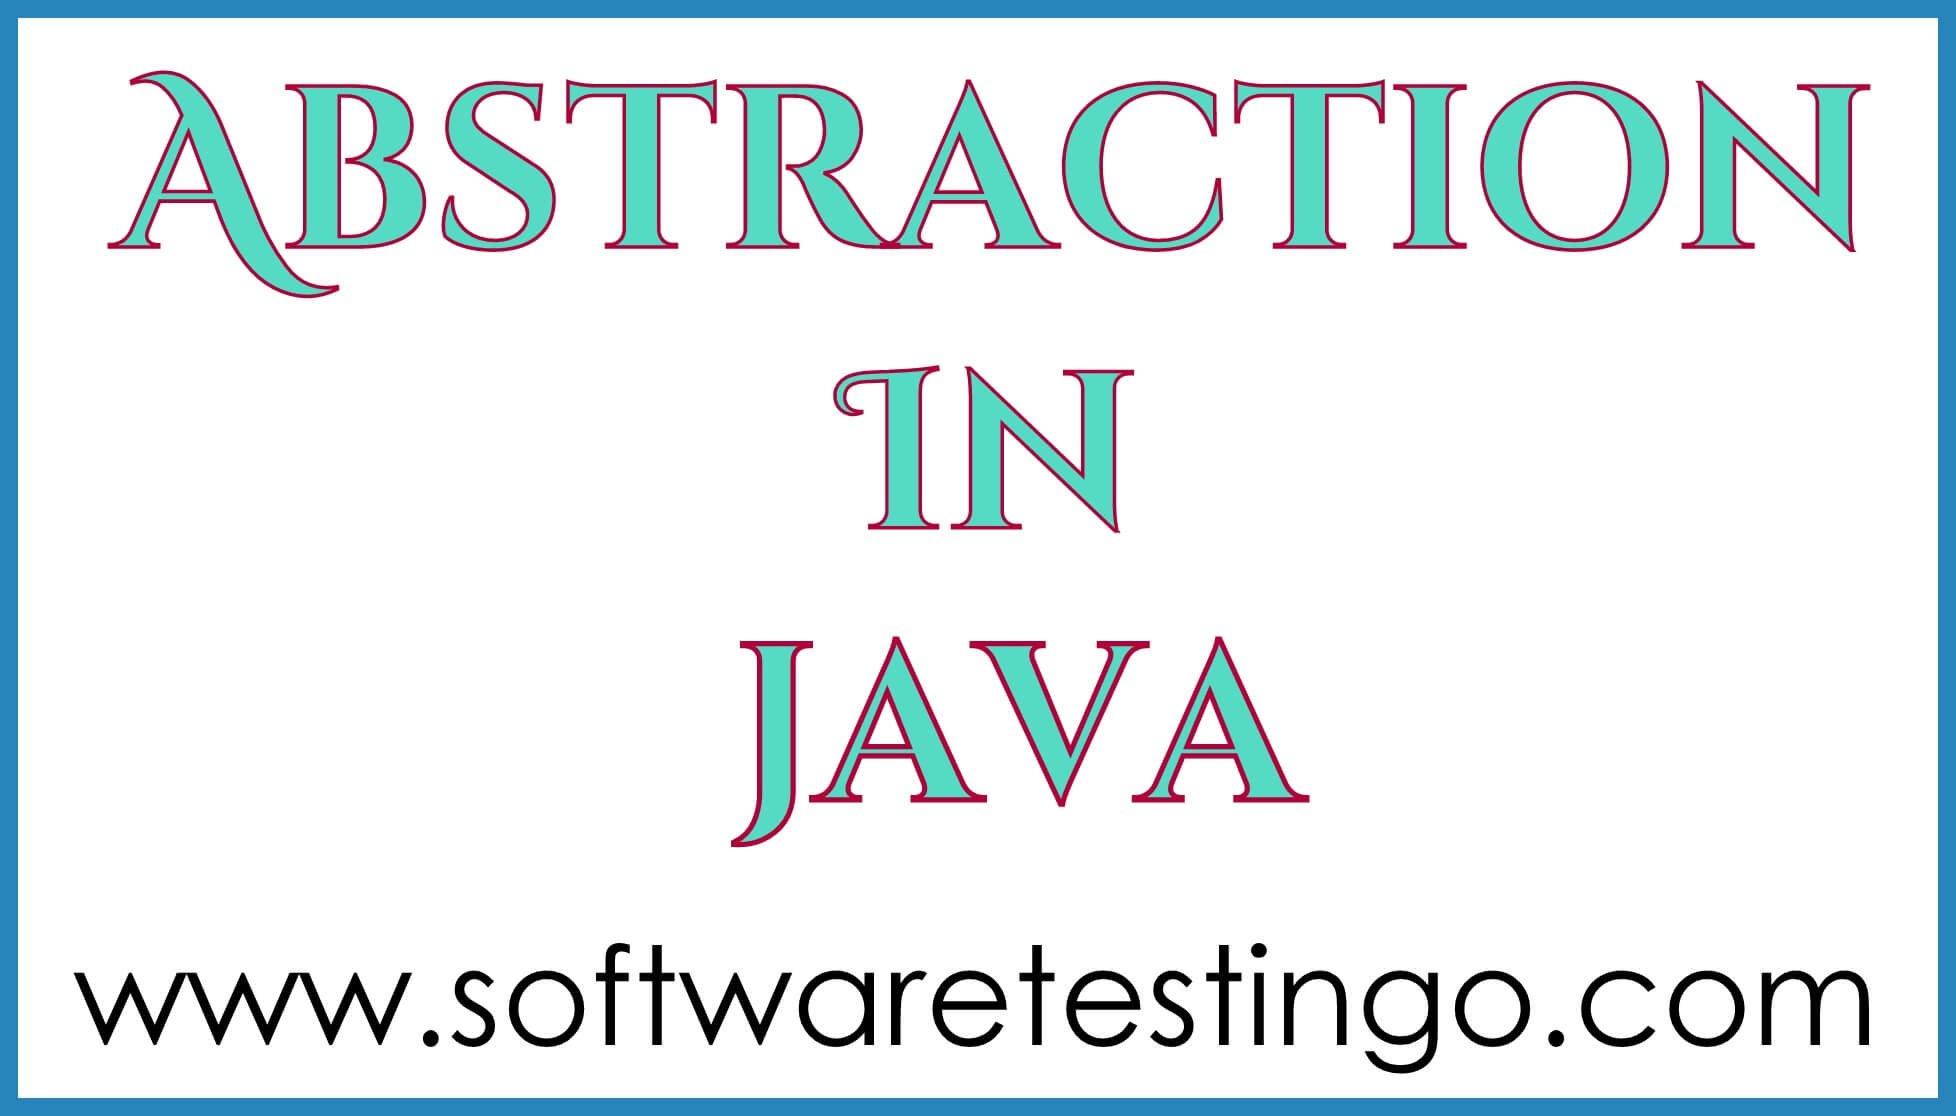 Abstraction in java